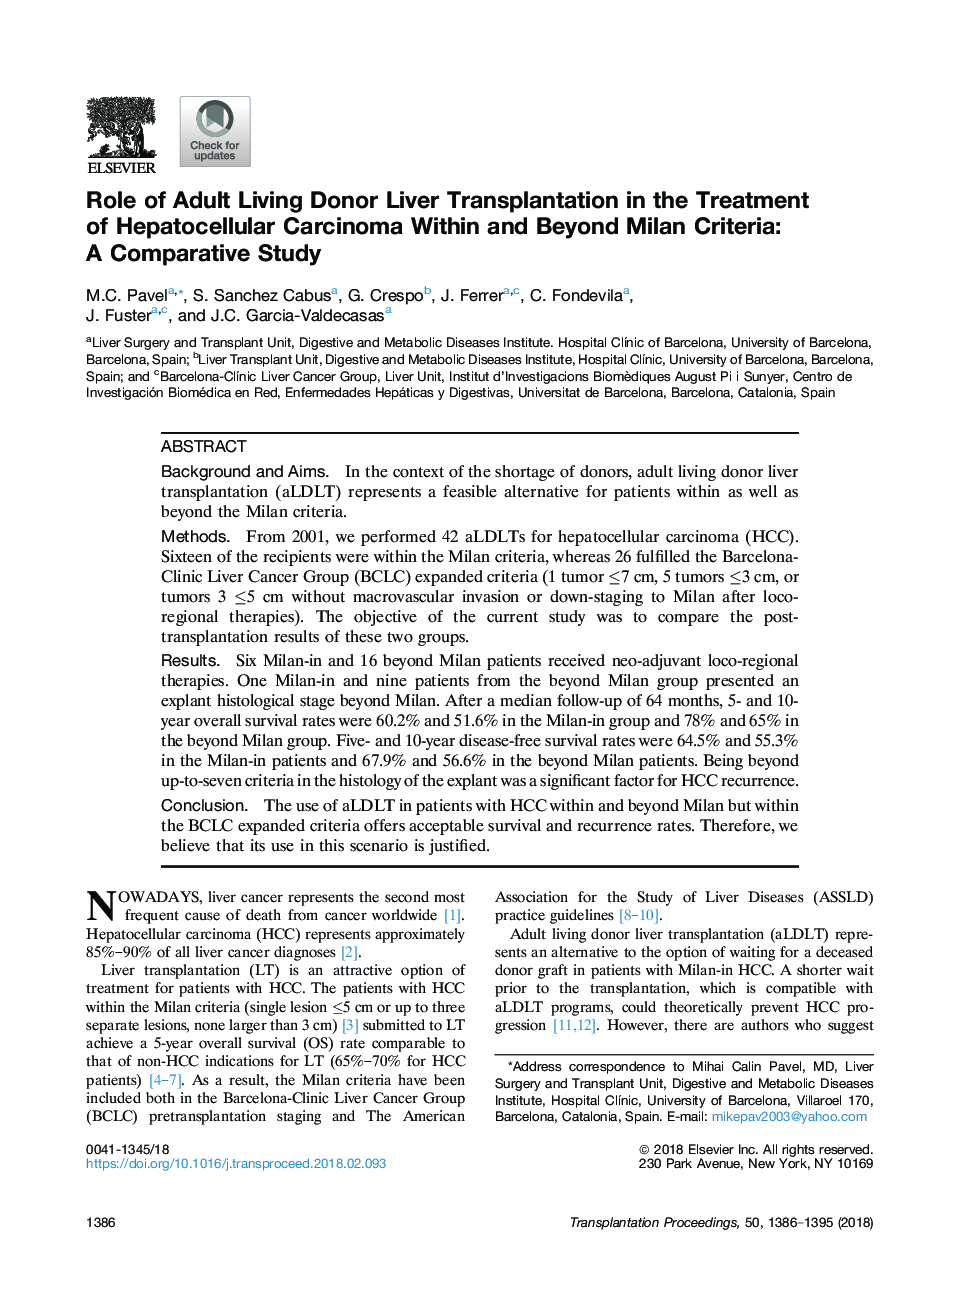 Role of Adult Living Donor Liver Transplantation in the Treatment of Hepatocellular Carcinoma Within and Beyond Milan Criteria: A Comparative Study